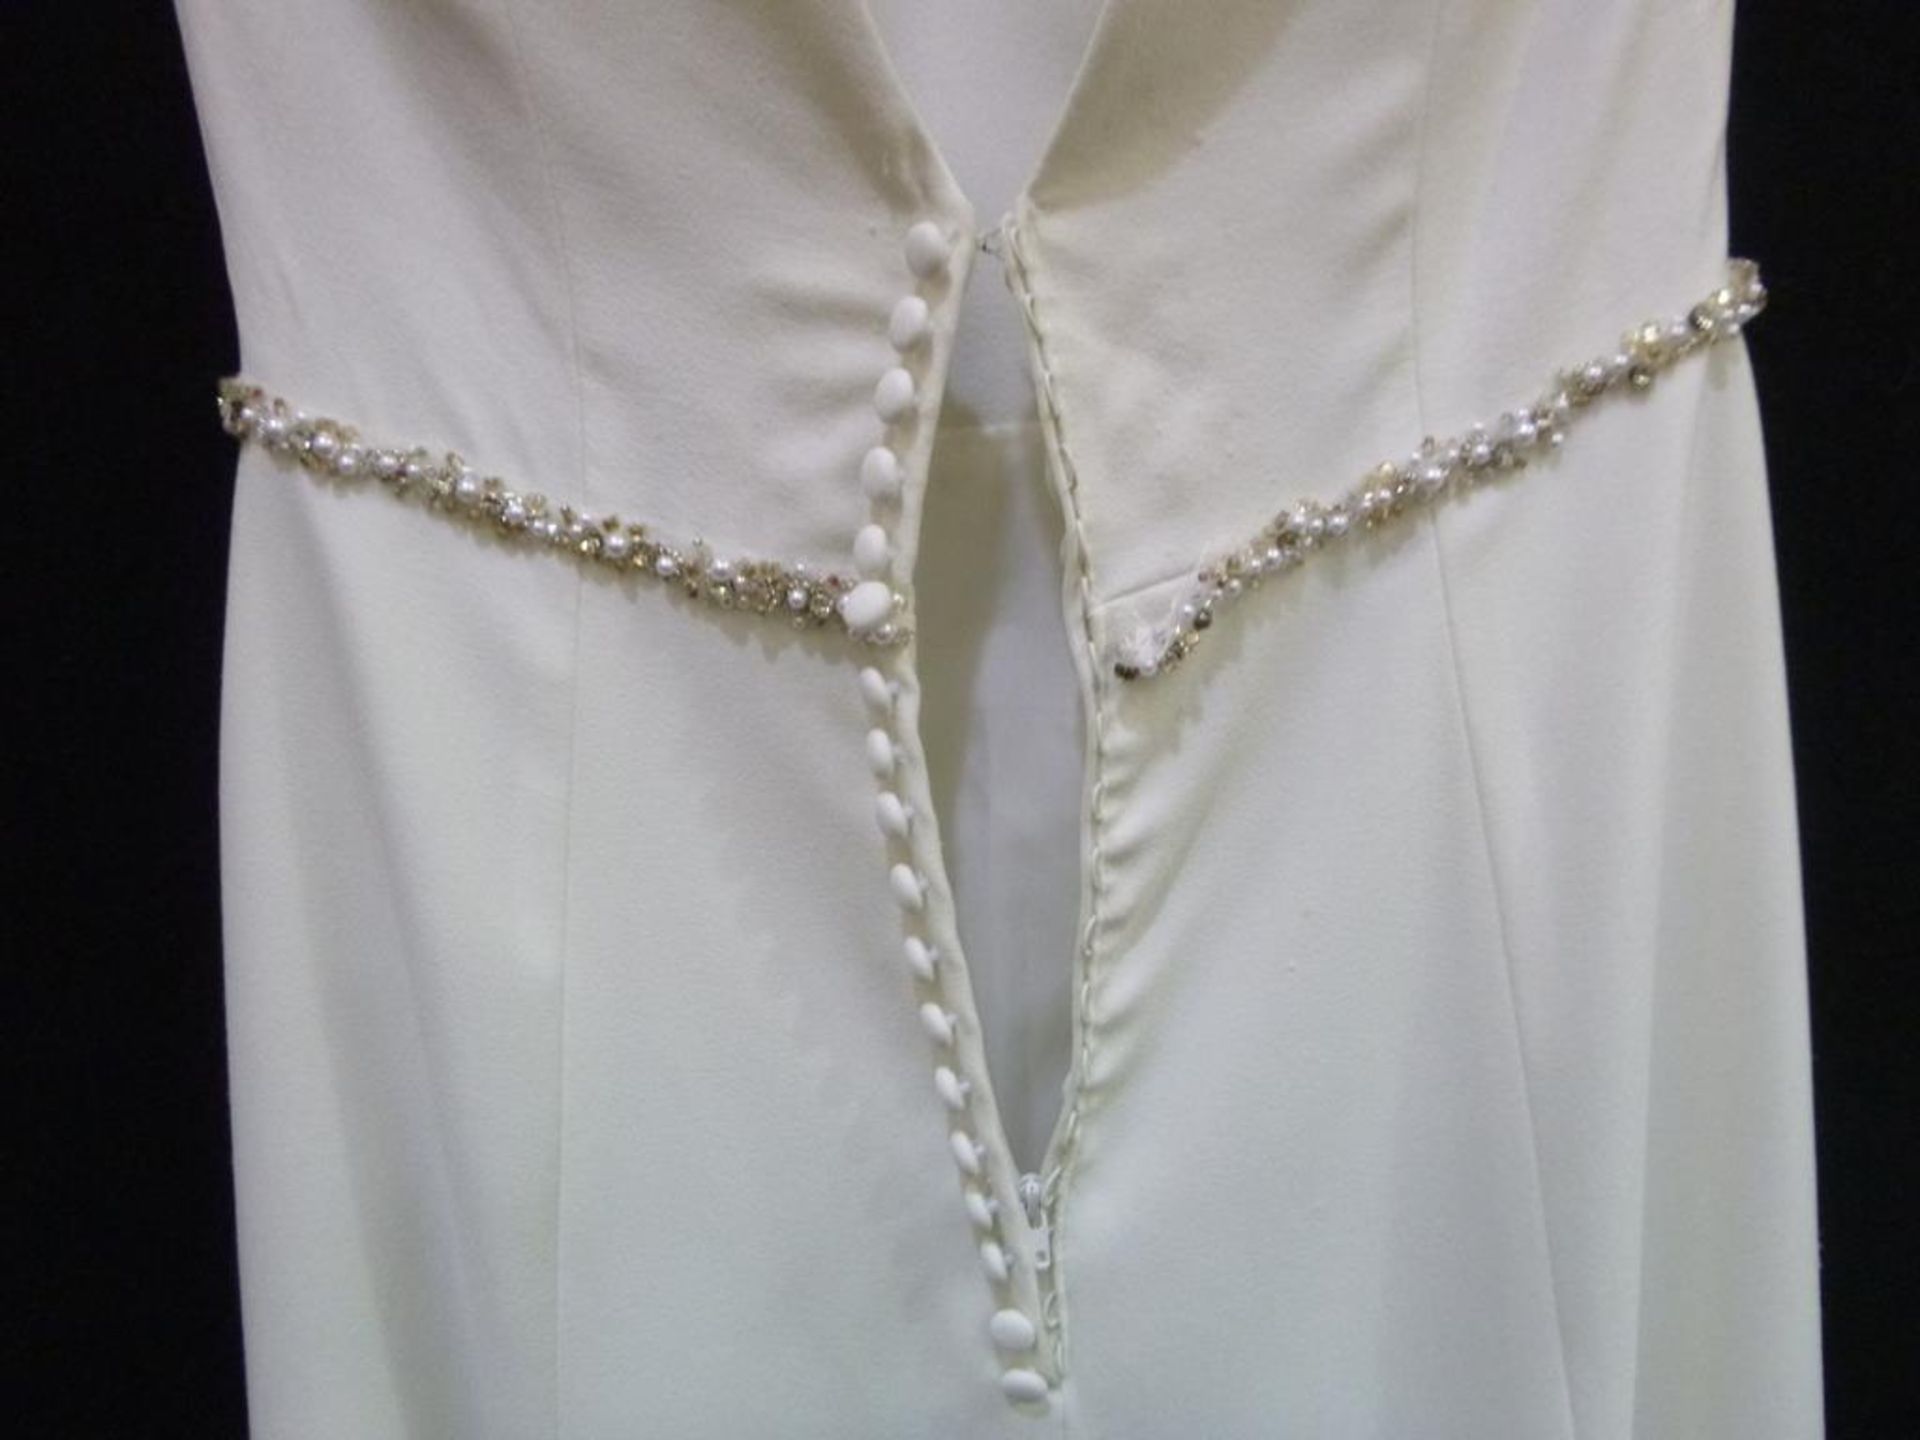 Marylise wedding dress with pearl detail - Image 7 of 10